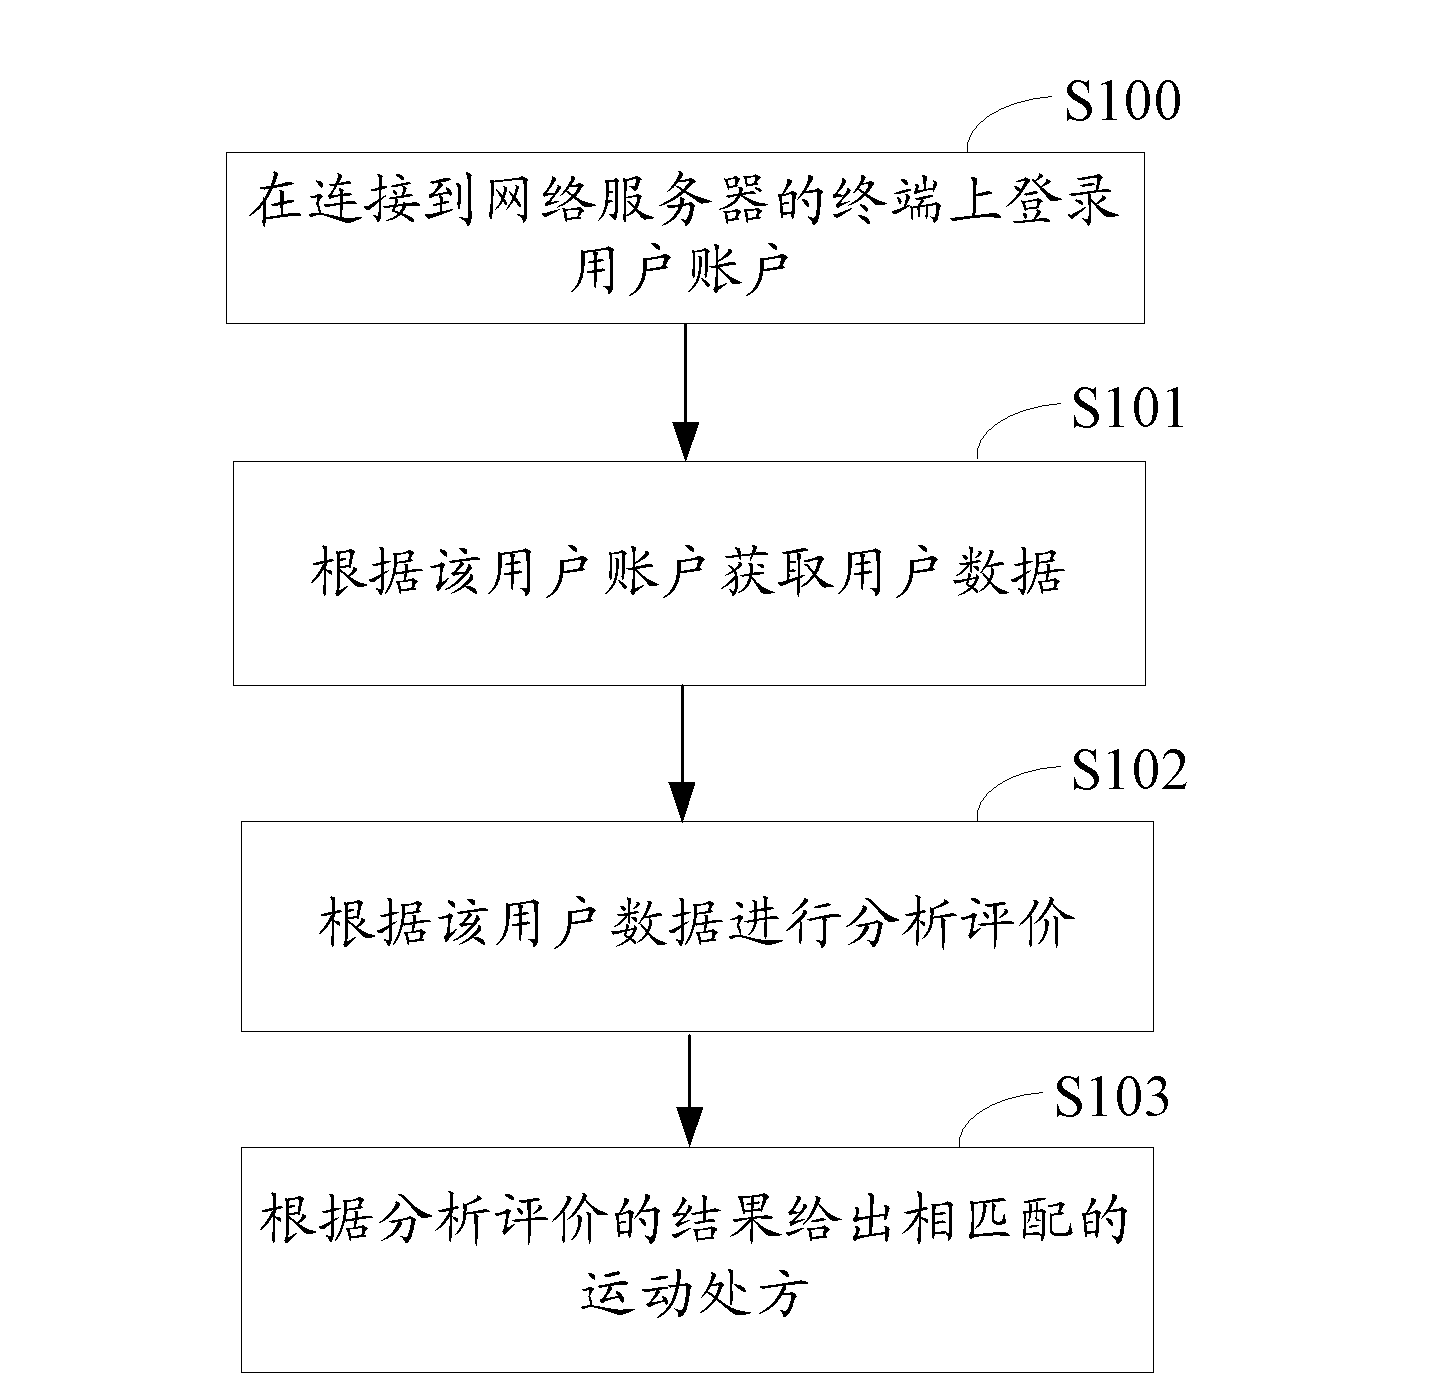 Exercise data management system and method